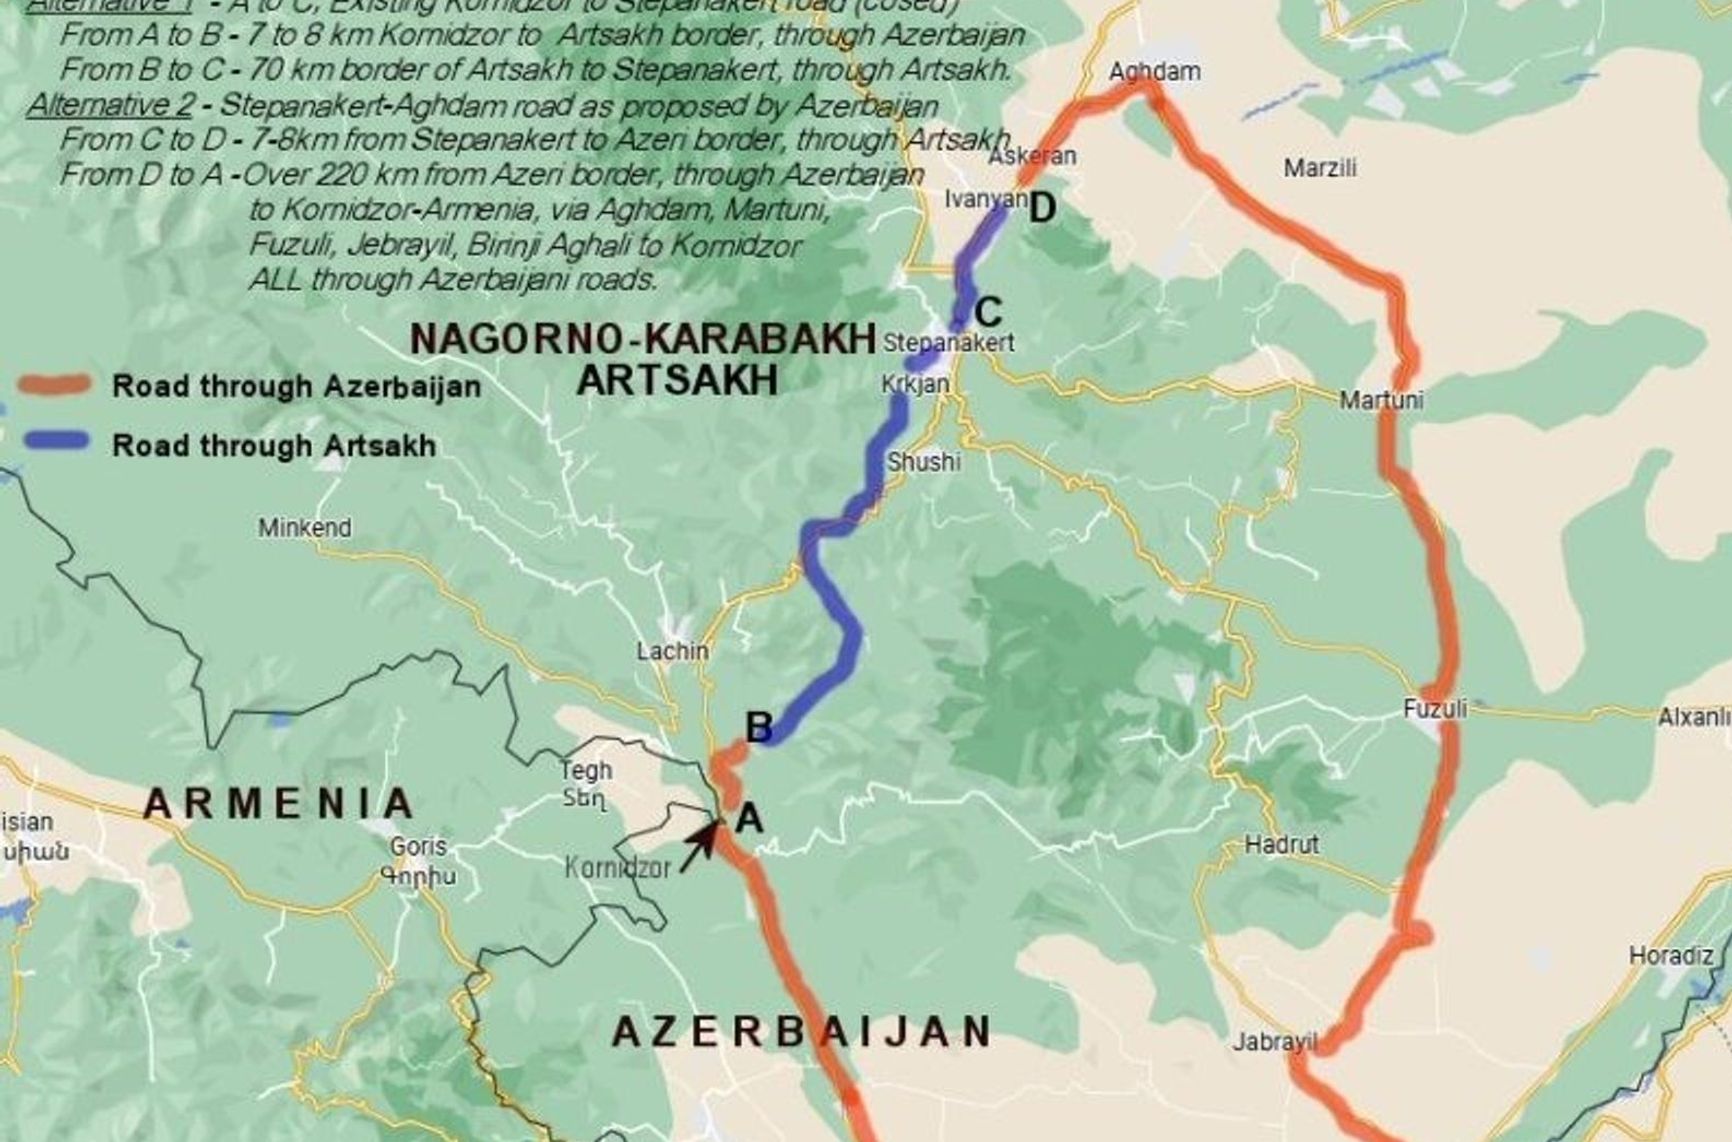 The road from Aghdam to Stepanakert, blocked in the vicinity of Askeran